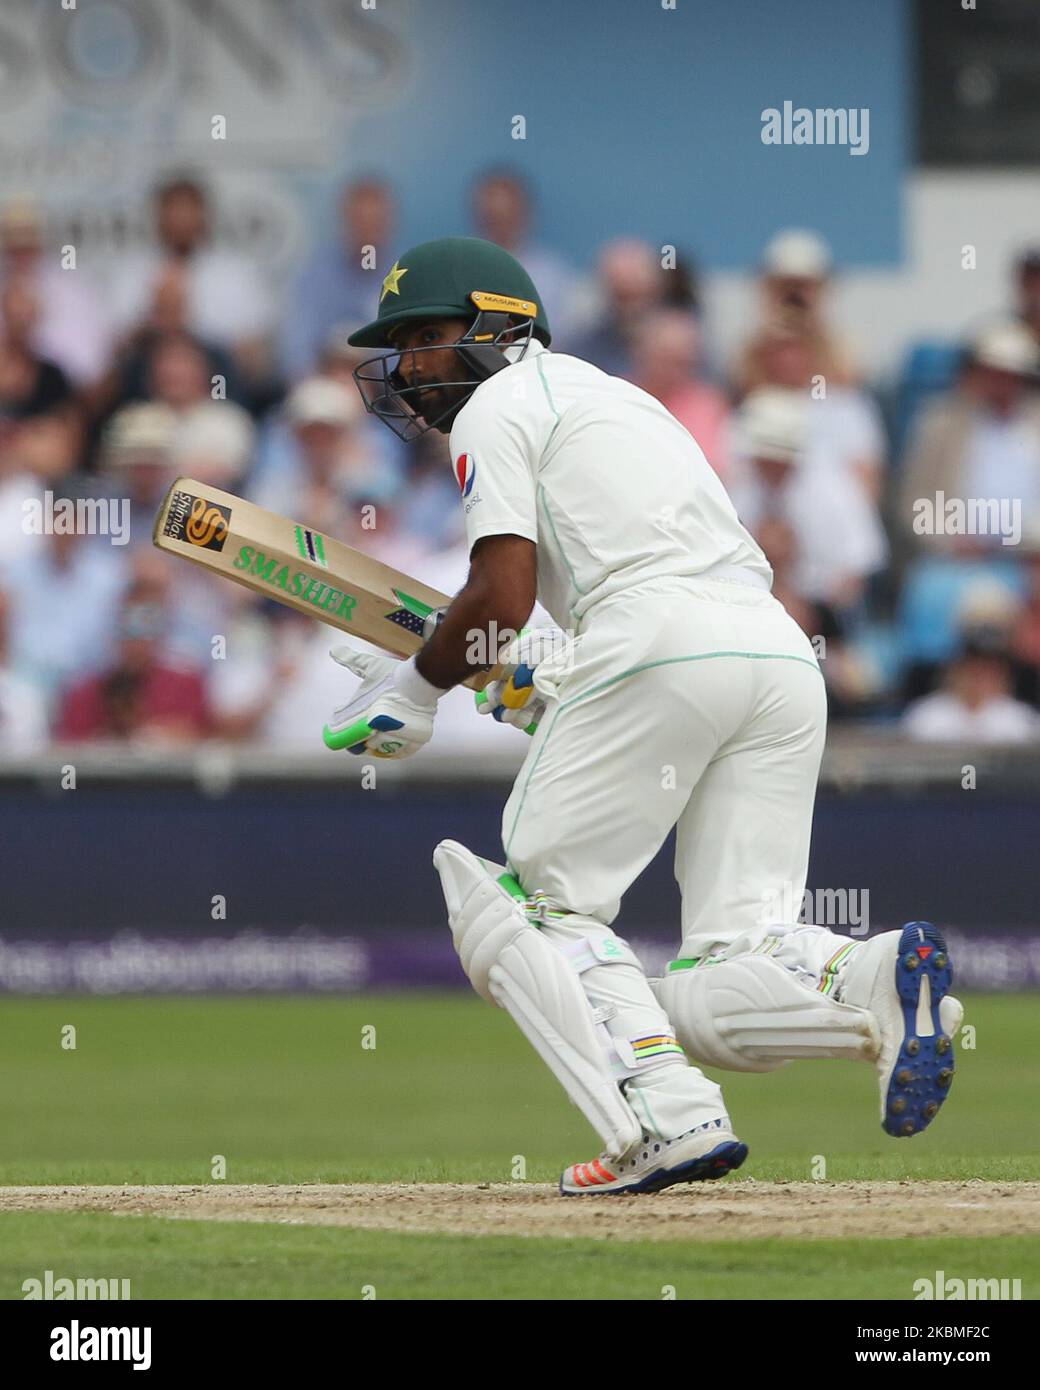 Pakistan's Asad Shafiq batting during the first day of the Second Nat West Test match between England and Pakistan at Headingley Cricket Ground, Leeds on Friday 1st June 2018. (Photo by Mark Fletcher/MI News/NurPhoto) Stock Photo